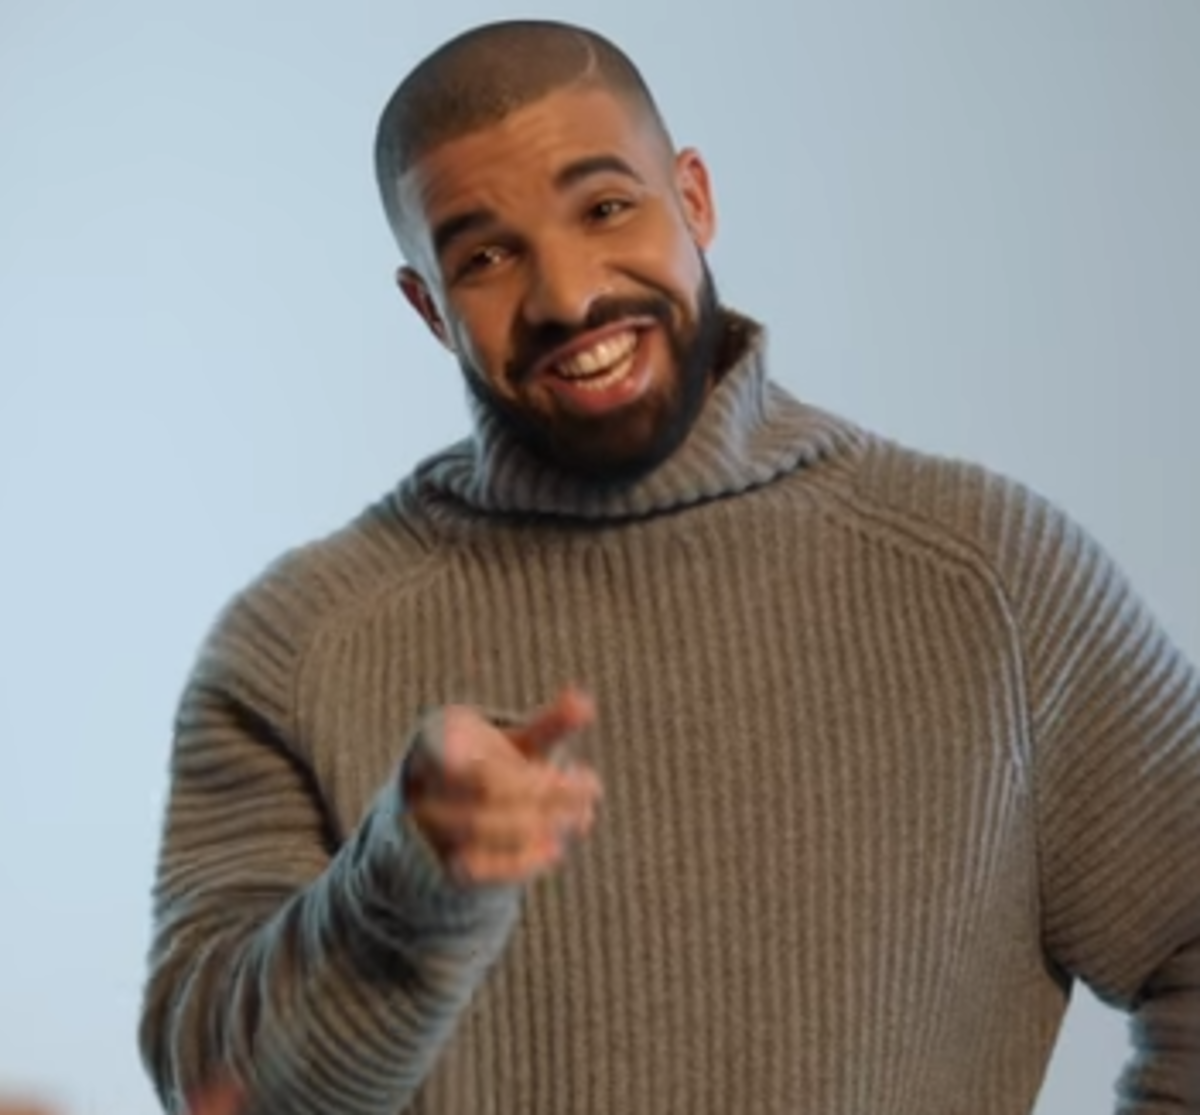 Drake wears a sweater during a commercial.